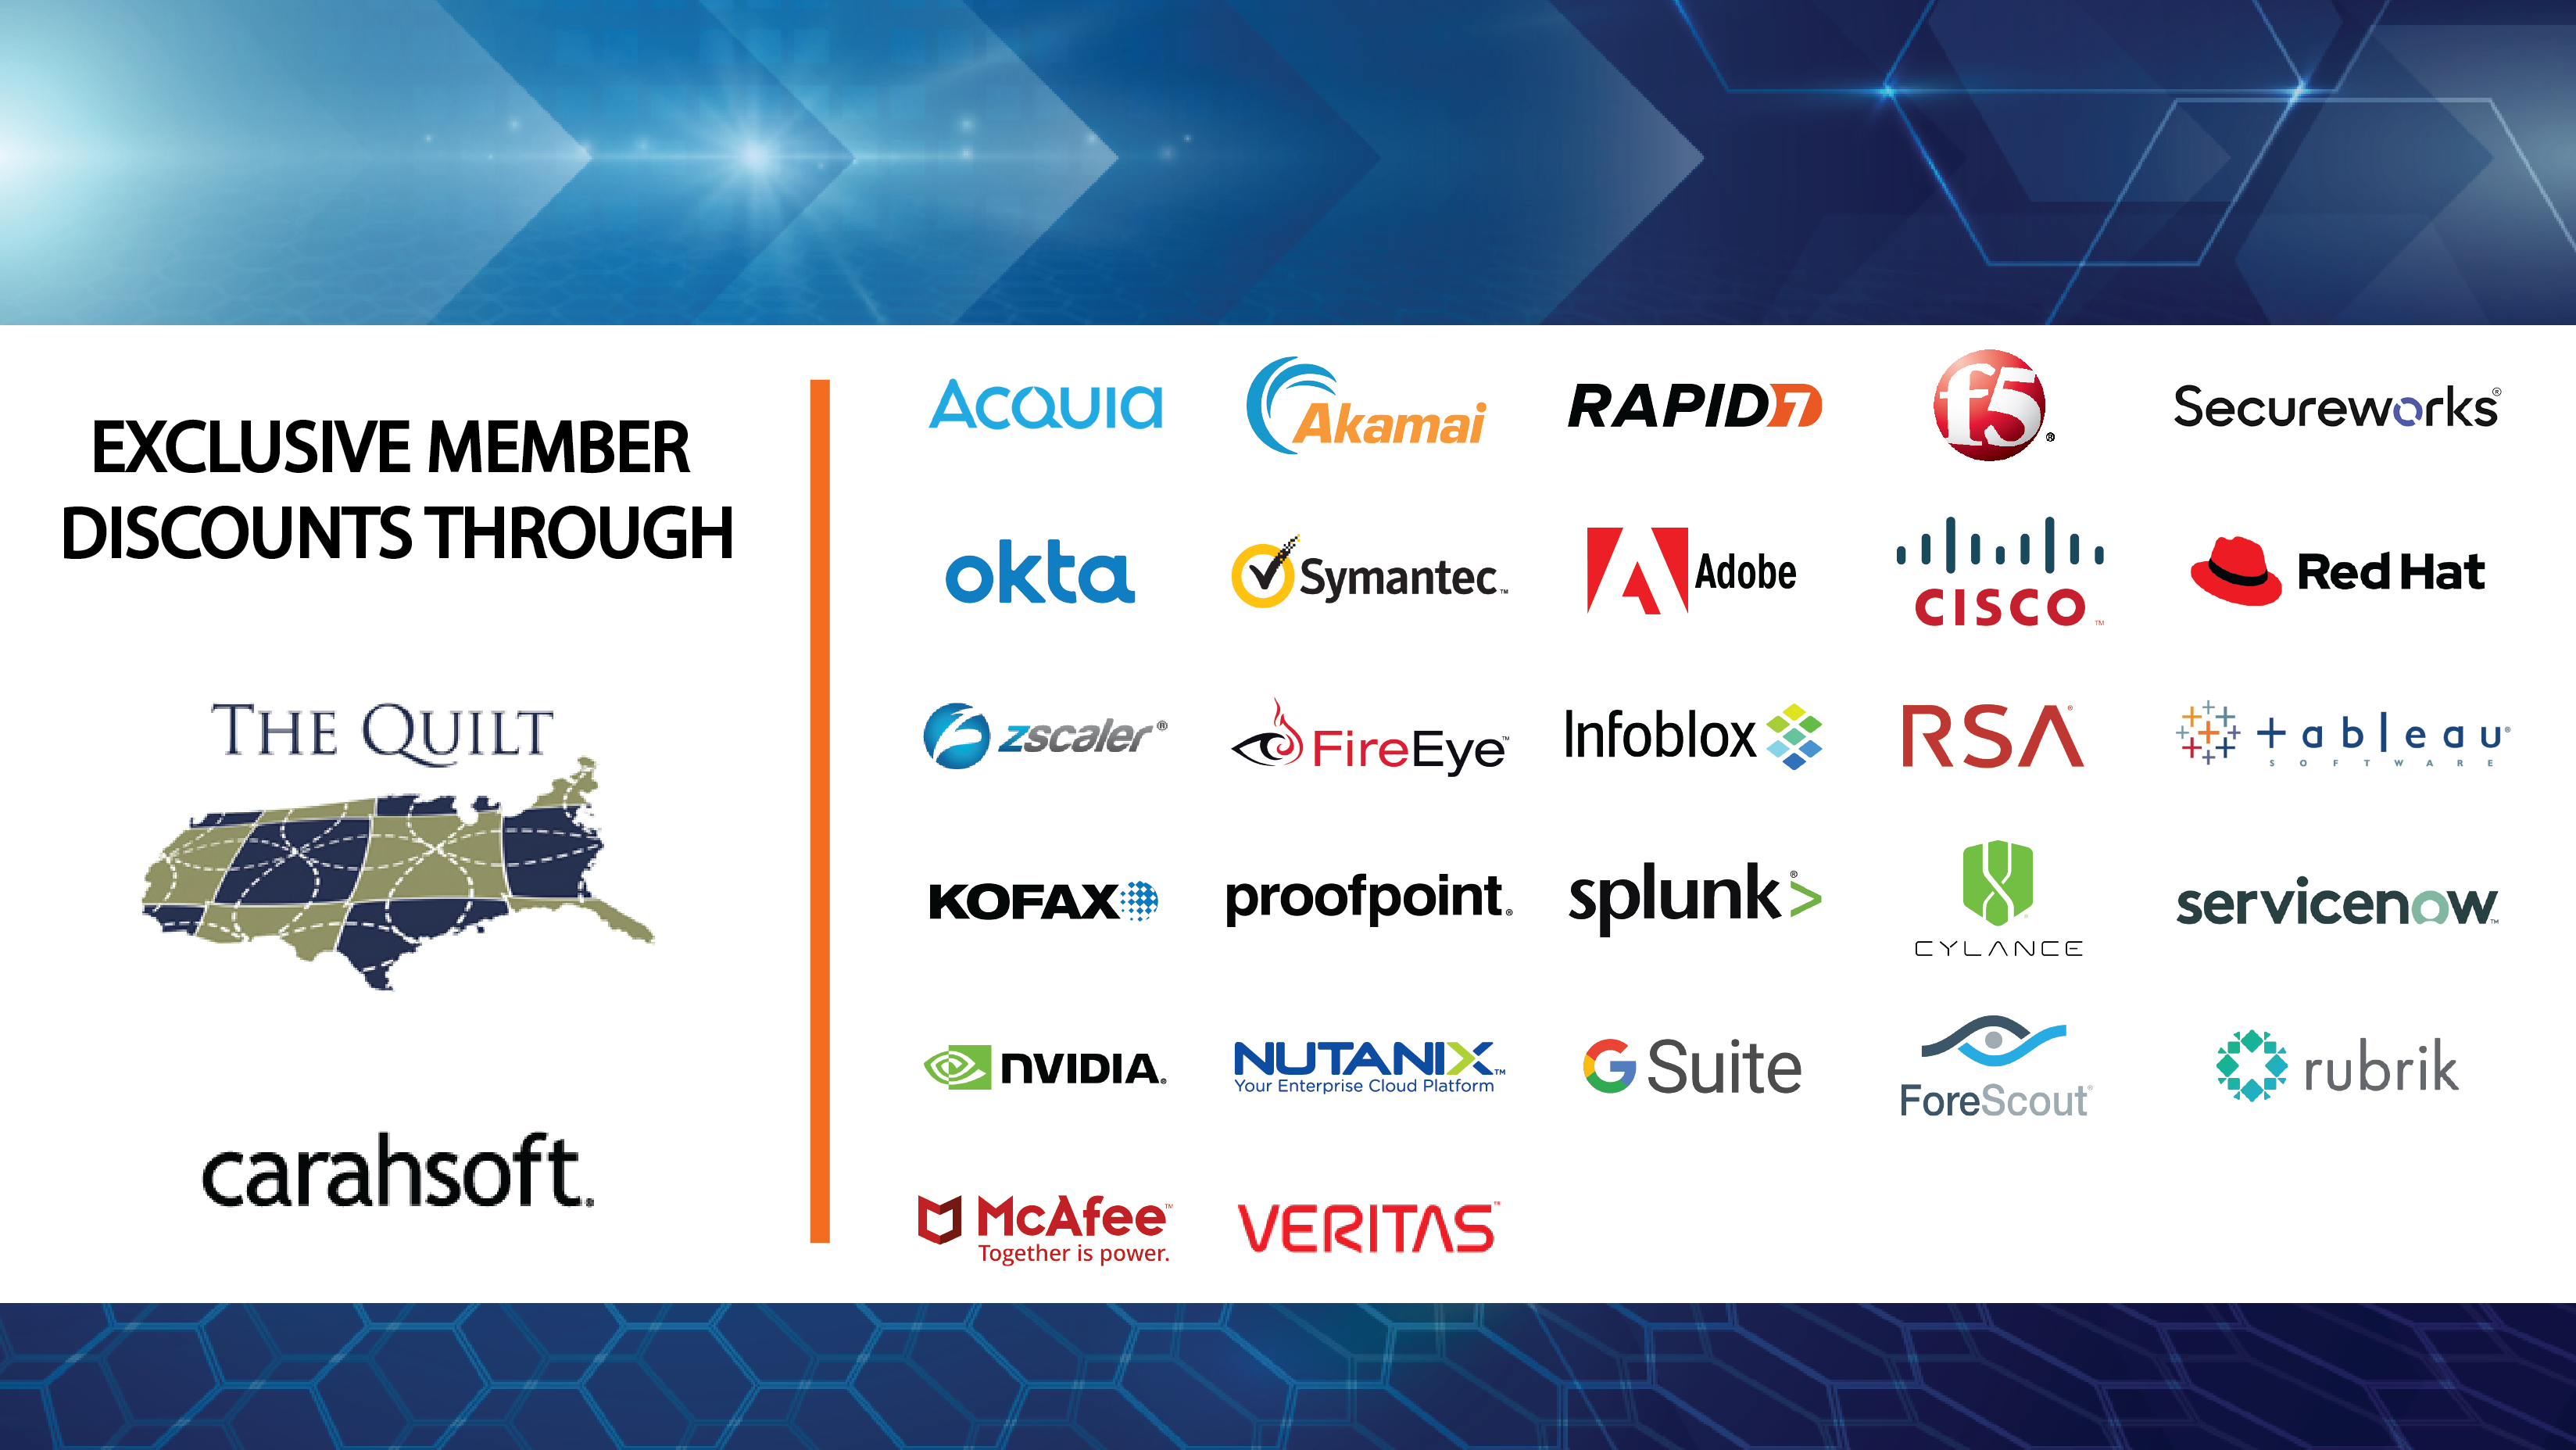 Exclusive Member Discounts Through The Quilt Carahsoft. Rows of logos including: Acquia, Akamai, Rapid7, F5, Secureworks, Symantec, Zscaler, RSA, Proofpoint, Splunk, Servicenow, Nutanix, Adobe, Cisco, Cylance, Fire Eye, Forescout, Google G-Suite, Kofax, McAfee, Nvidia, Red Hat, Rubrik, Tableau, Veritas